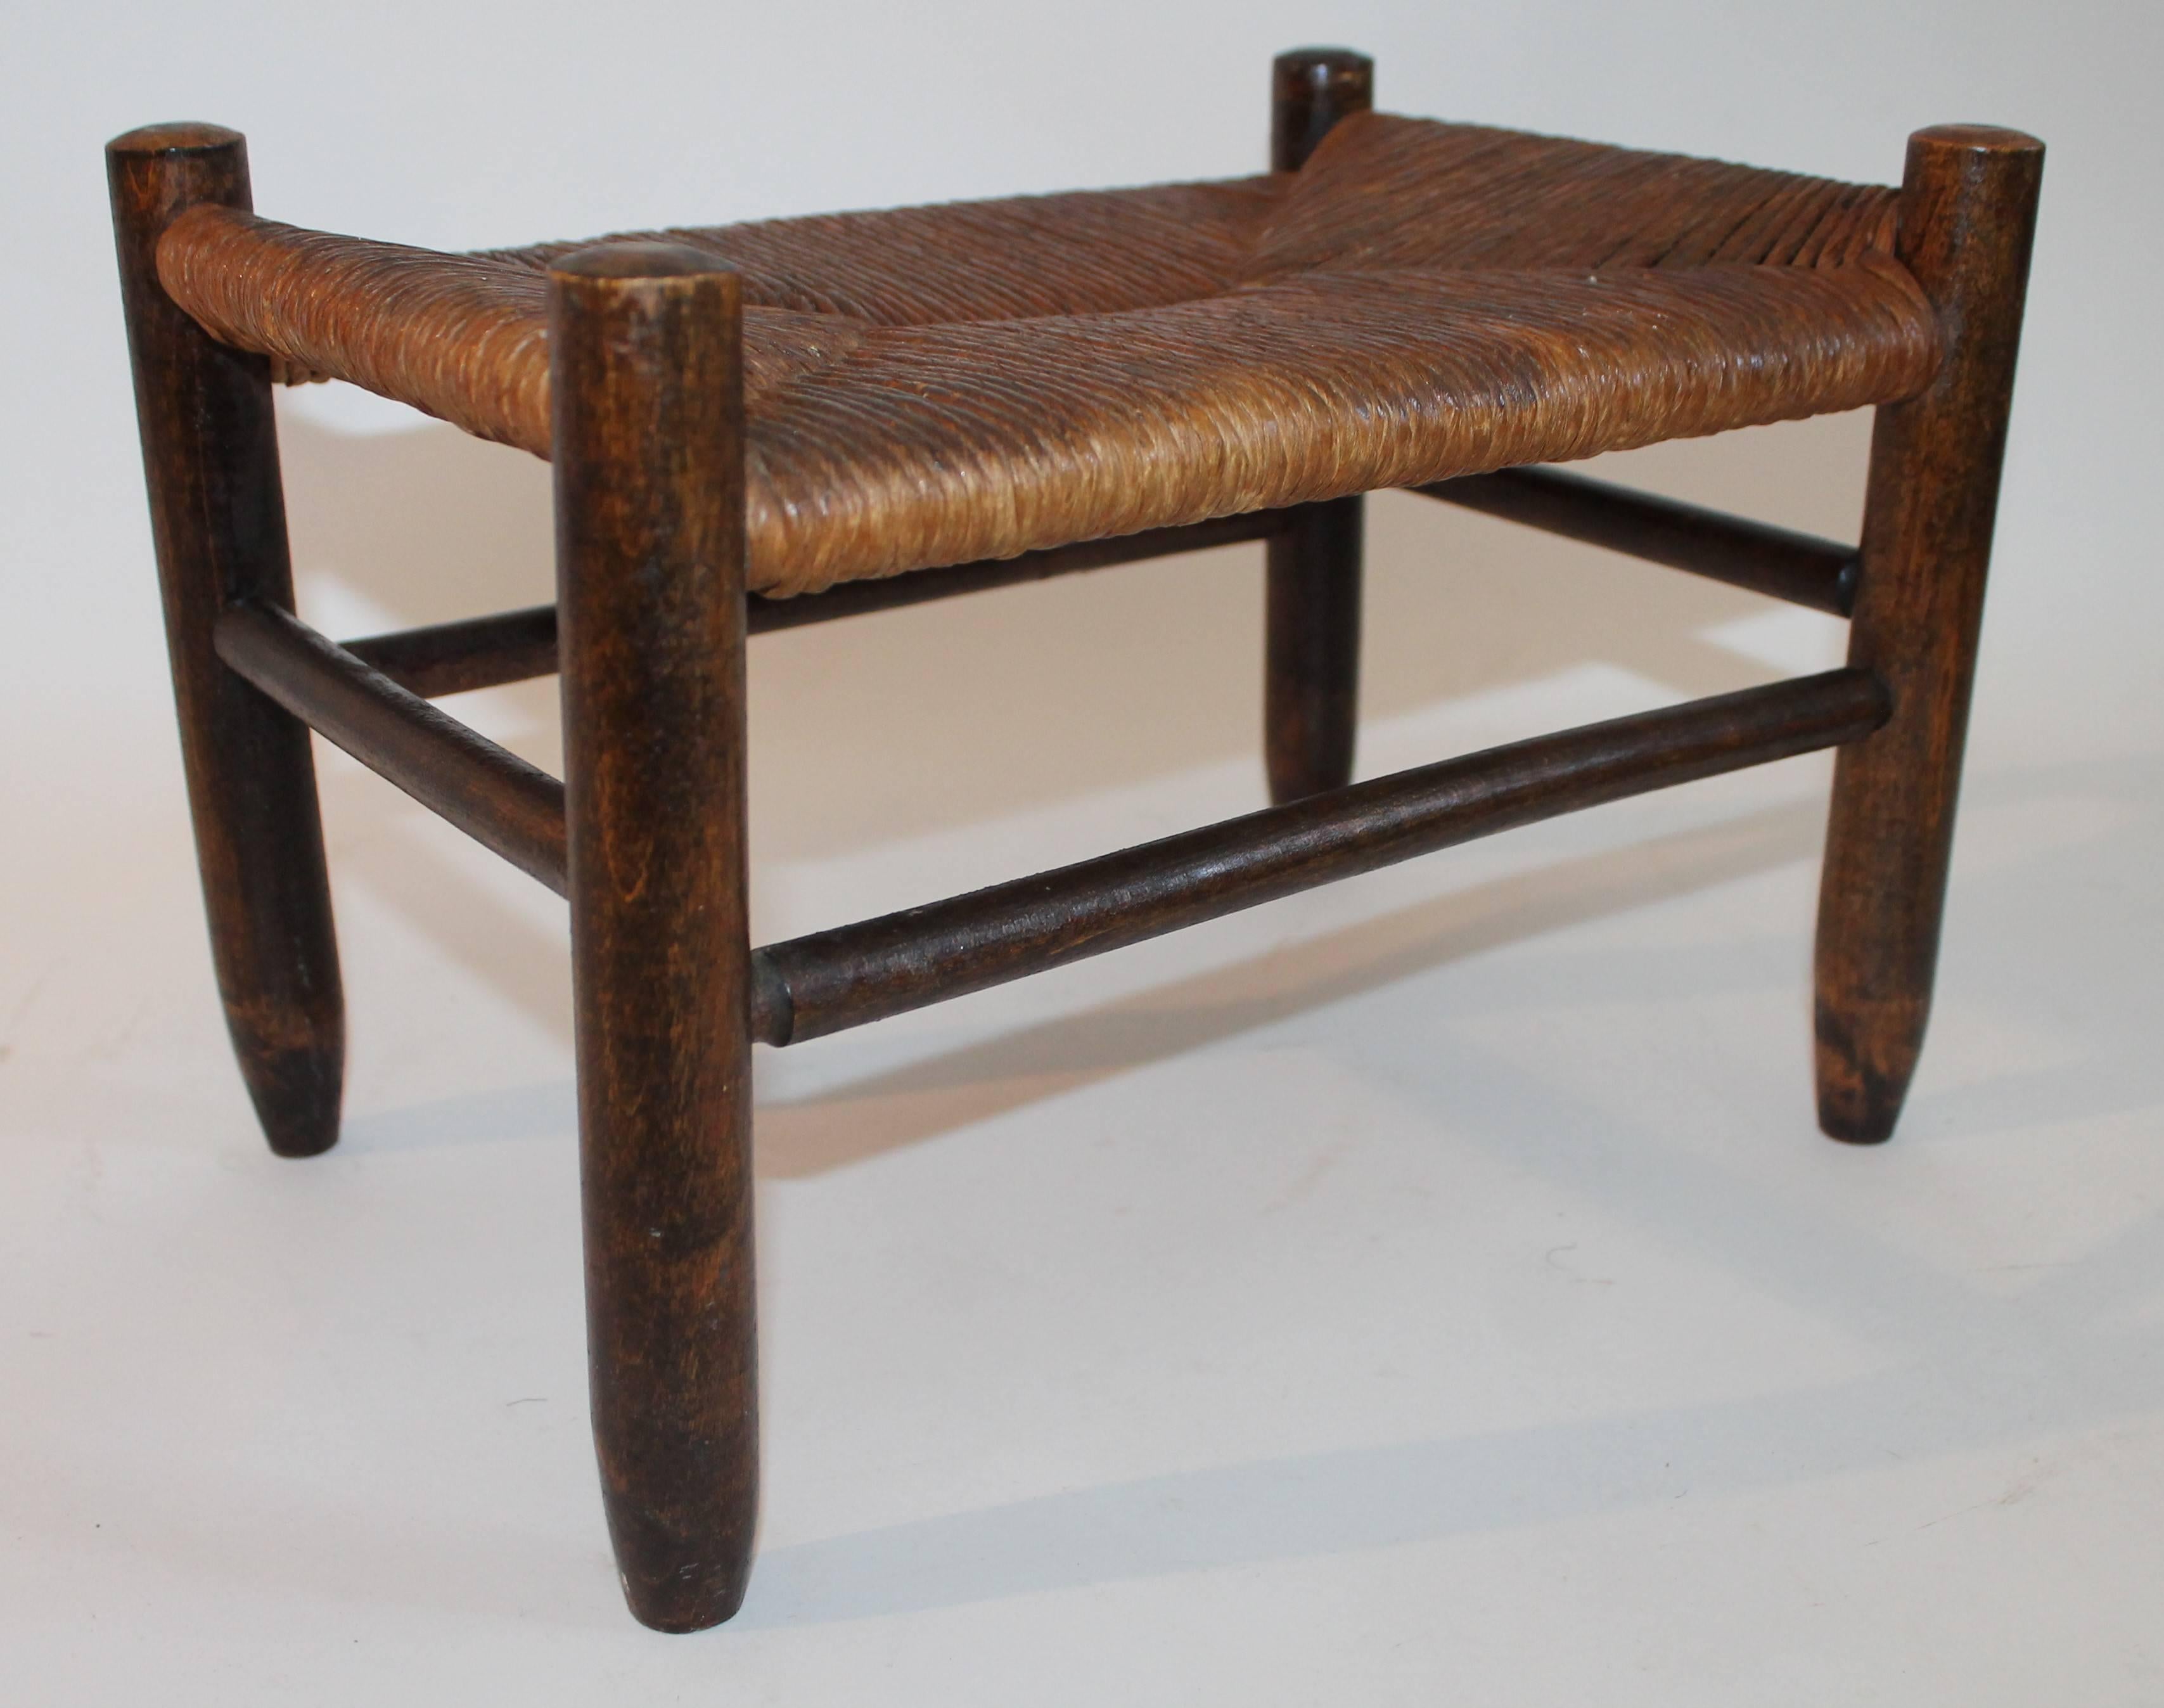 This 19th century Shaker style foot stool is in fine condition and has a handwoven top.